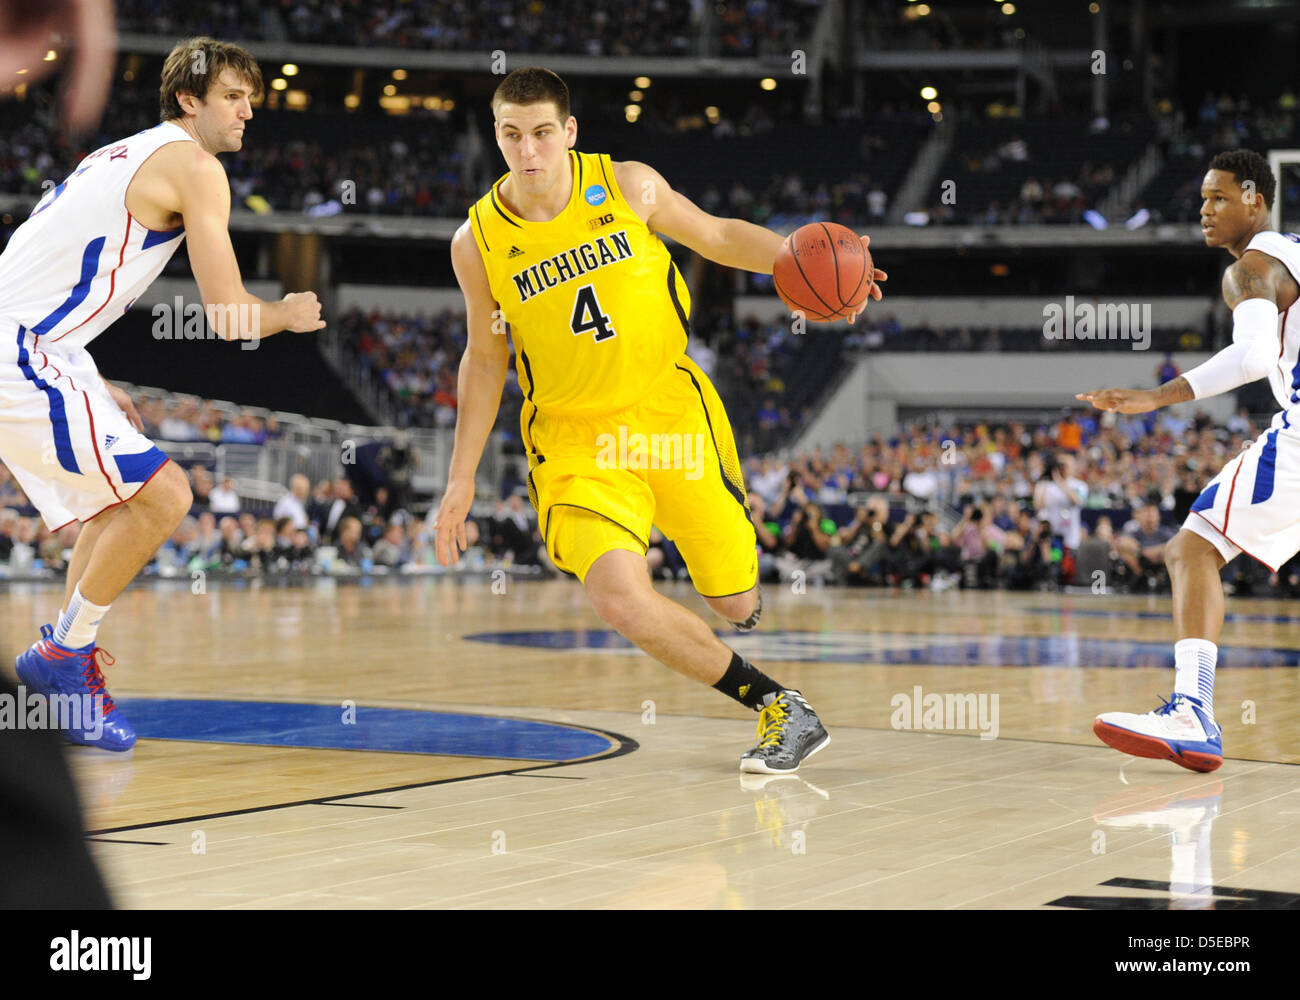 March 29, 2013: Michigan Wolverines forward Mitch McGary #4 scored 25 points during the NCAA Tournament South region between the University of Michigan Wolverines and the University of Kansas Jayhawks at Cowboys Stadium in Arlington, TX Michigan defeated Kansas 87-85 Stock Photo